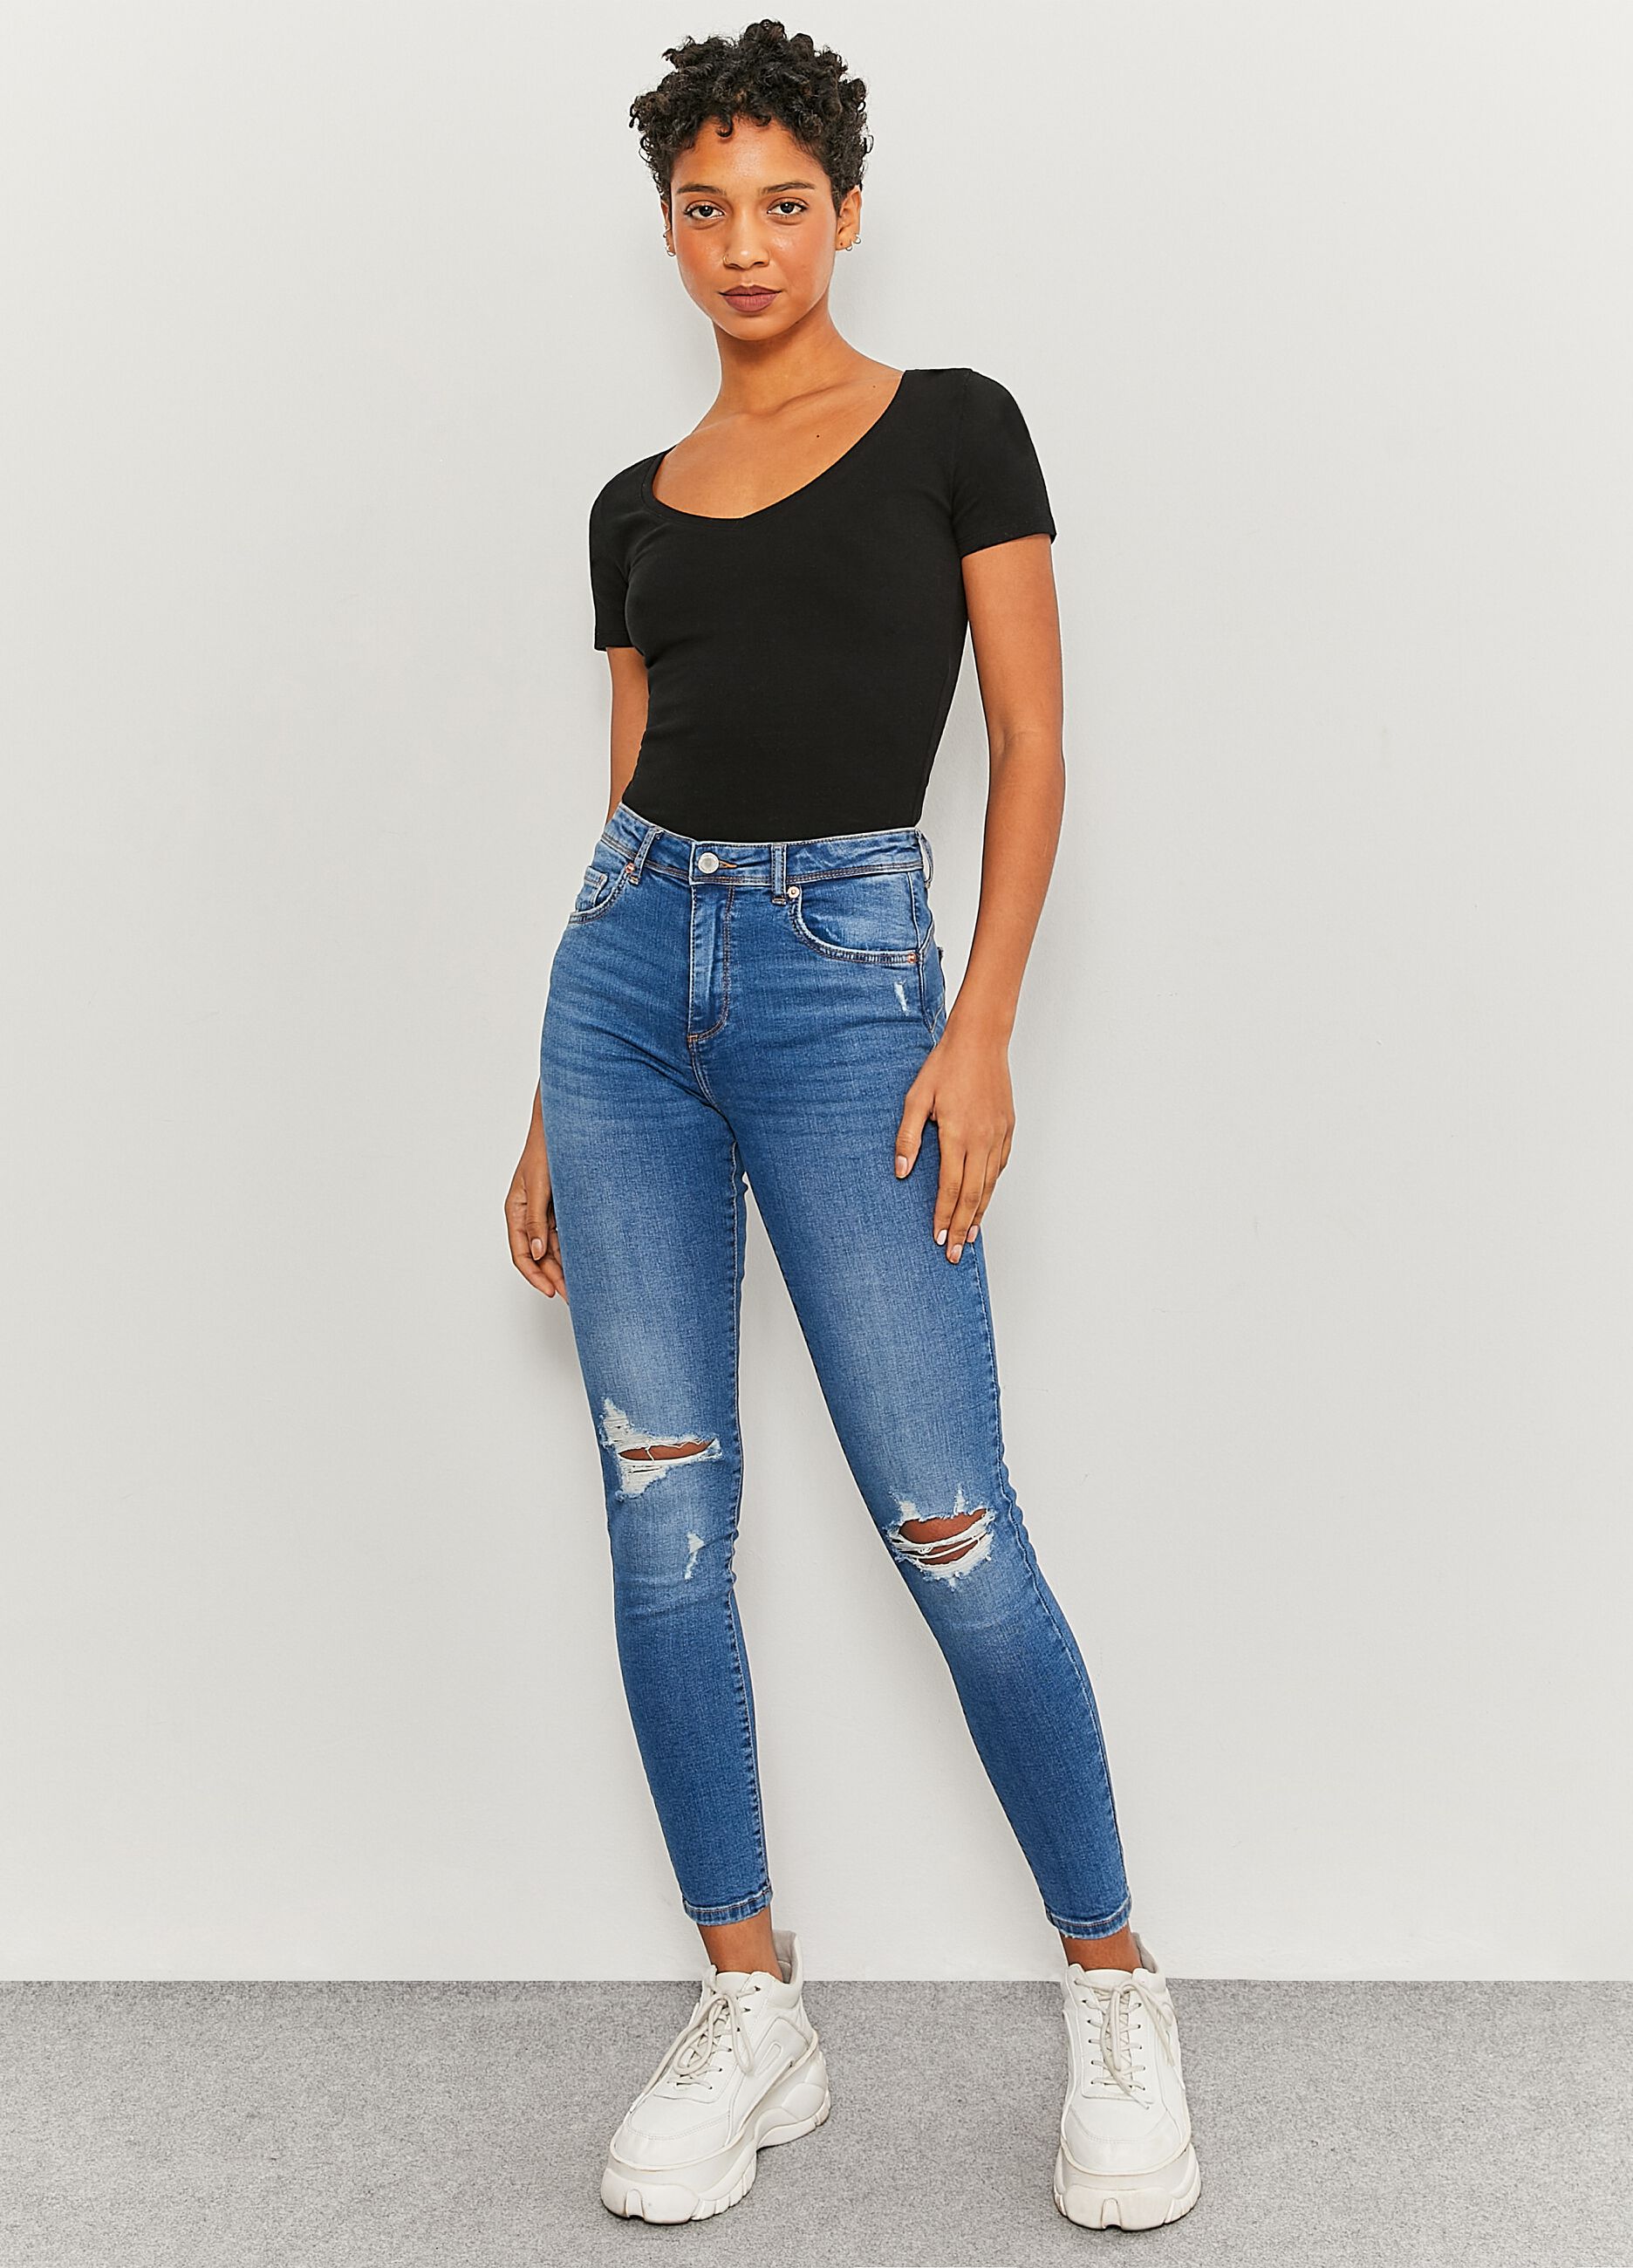 TALLY WEIJL Woman's Denim Distressed-effect push-up jeans